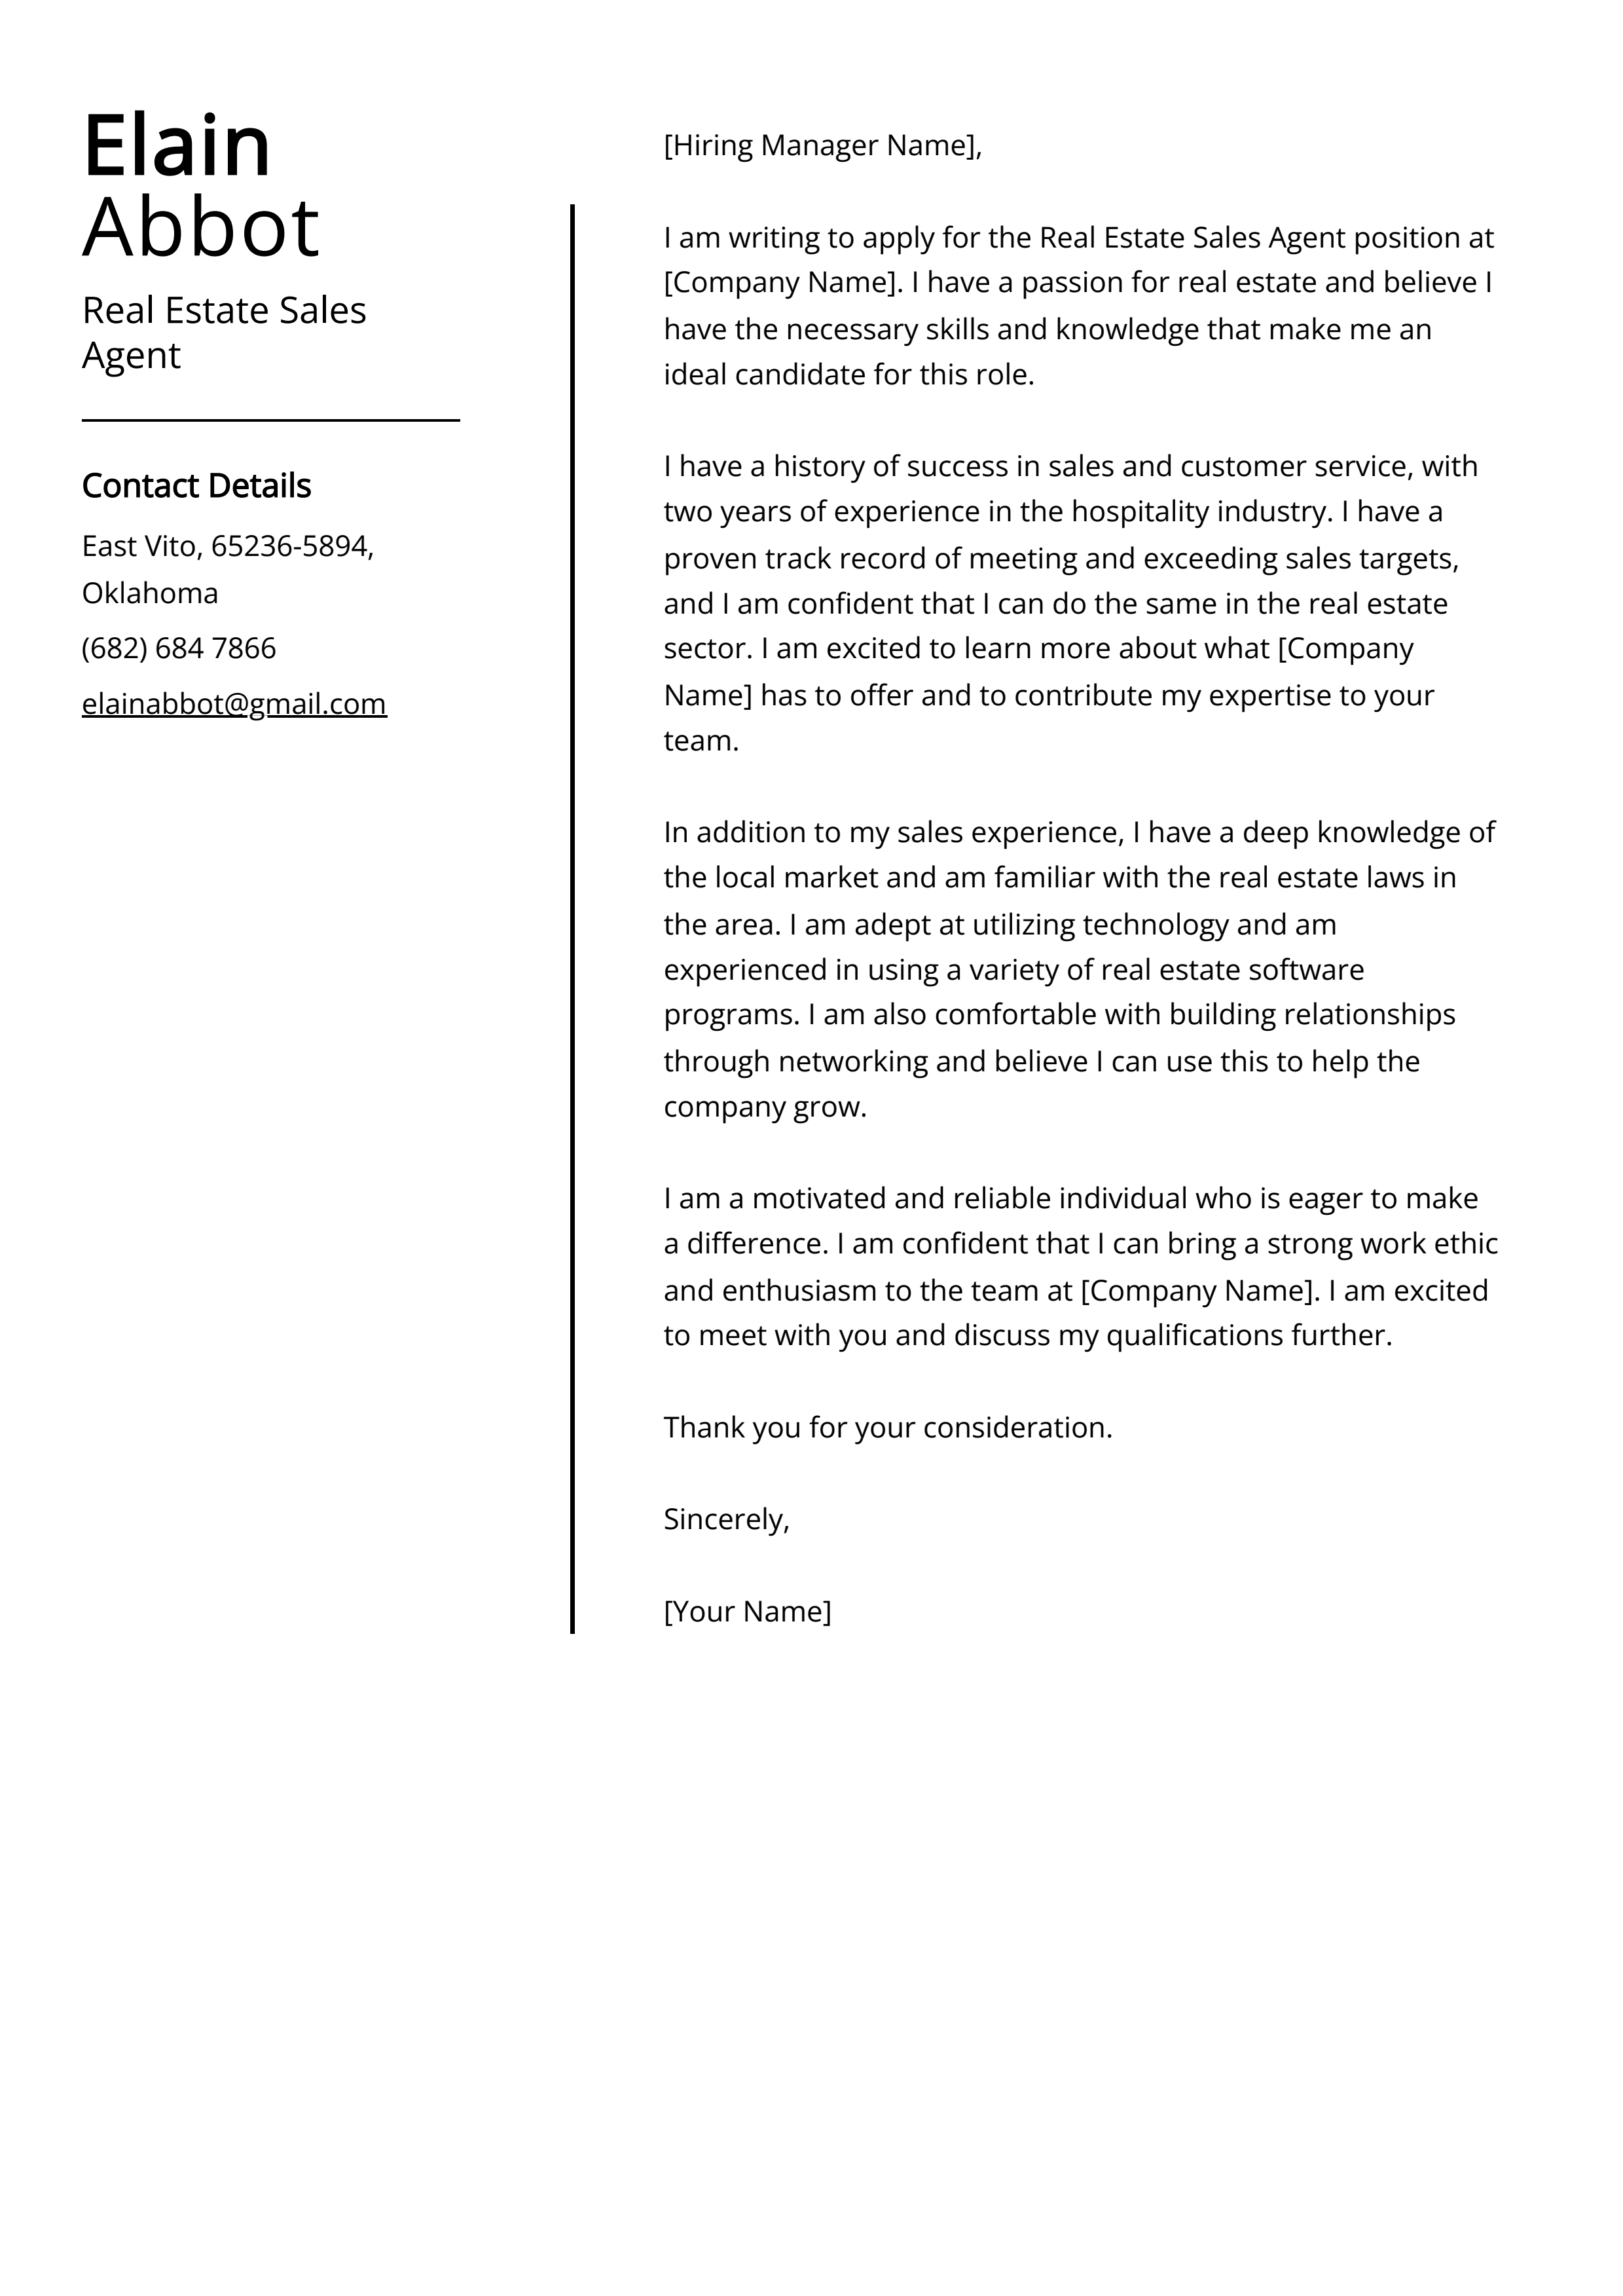 Real Estate Sales Agent Cover Letter Example